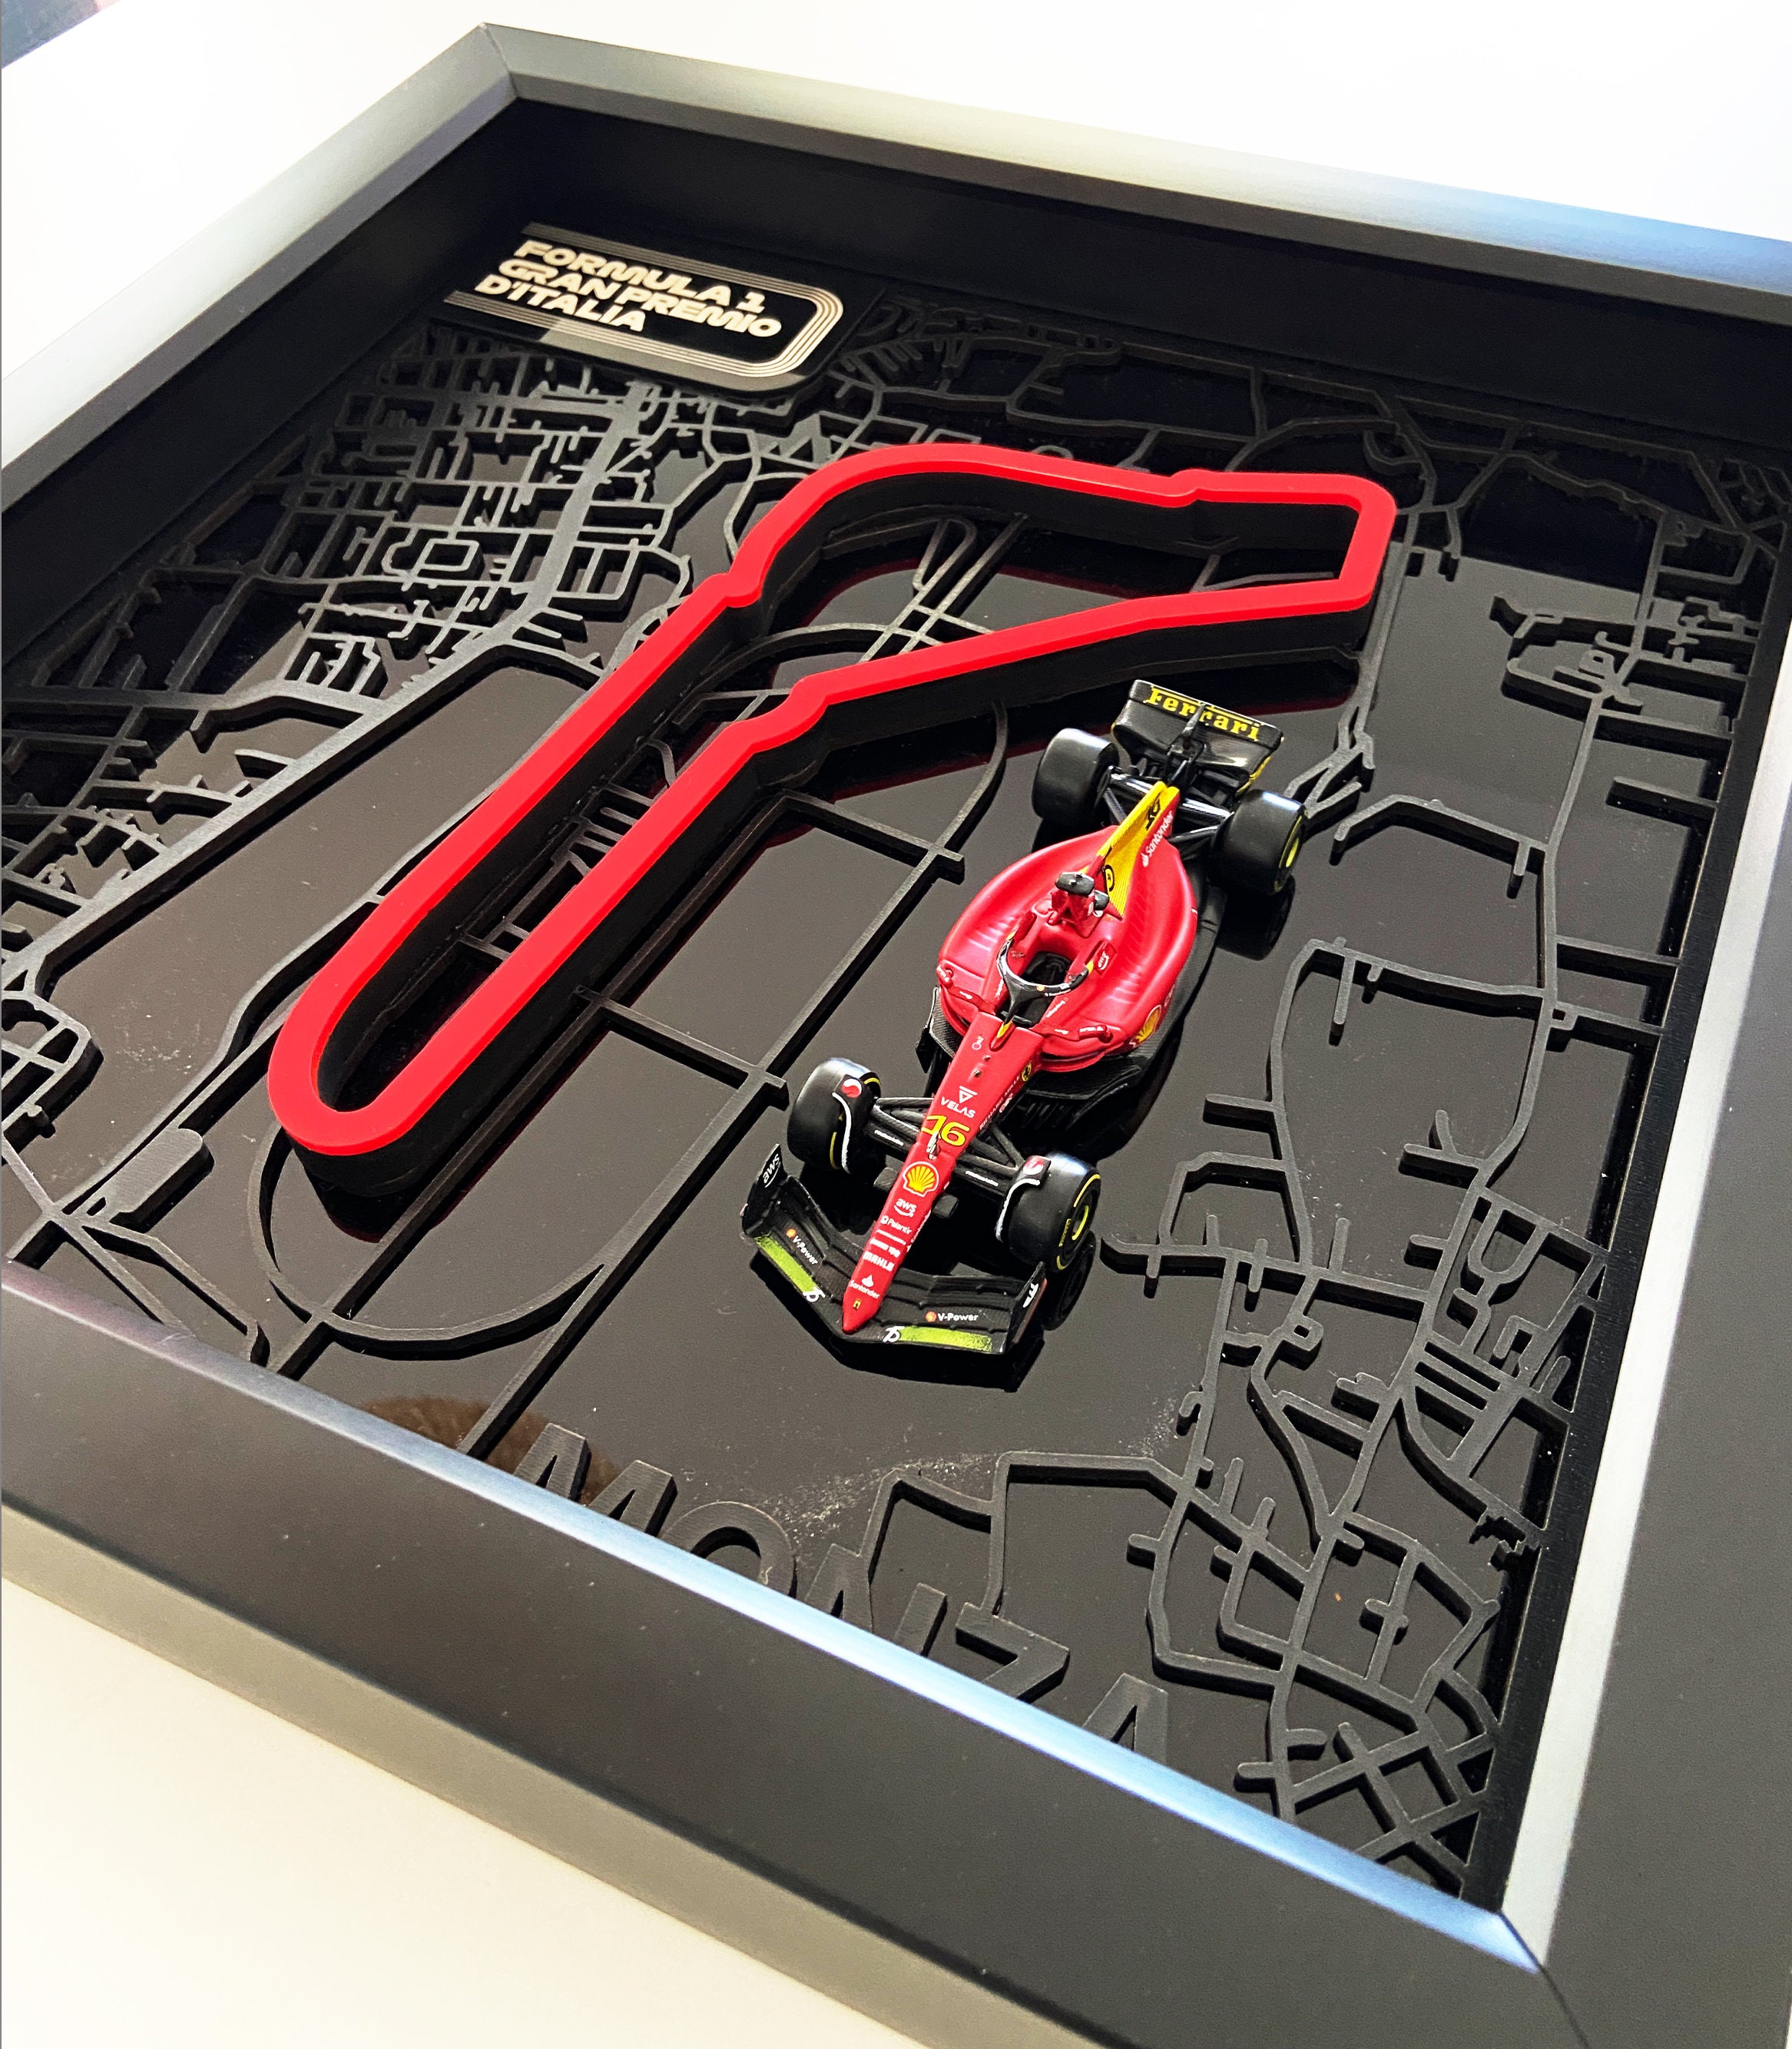 Monza Circuit Map and Ferrari F1-75 3D Frame - Etsy